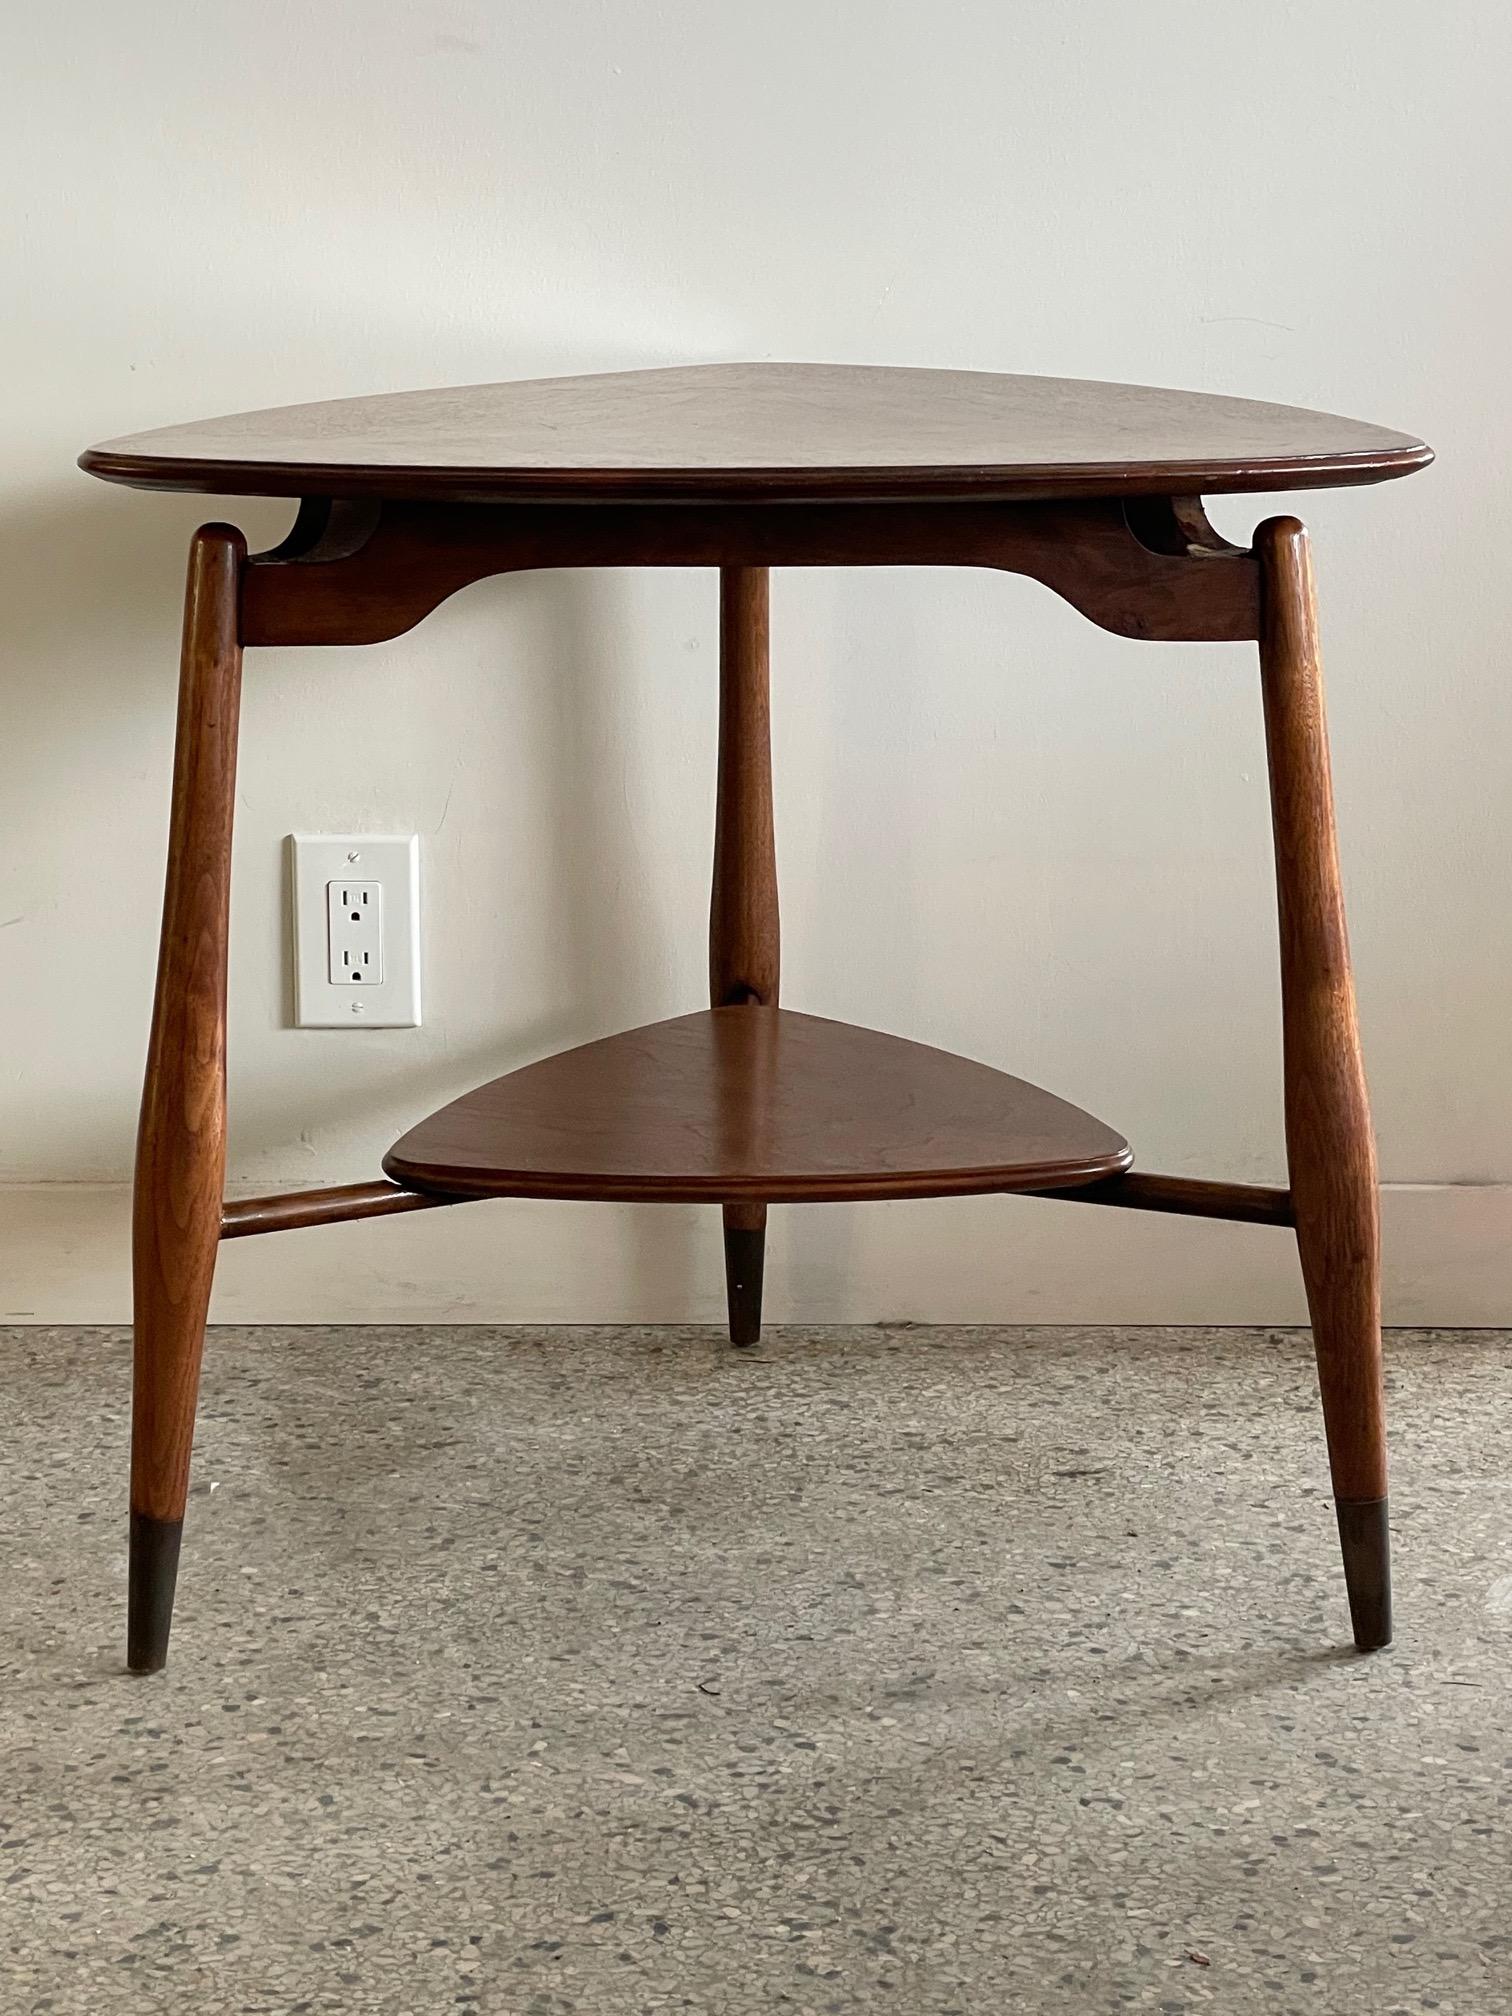 An occasional table in walnut by John Widdicomb. Floating top with lower shelf, brass sabots on legs.